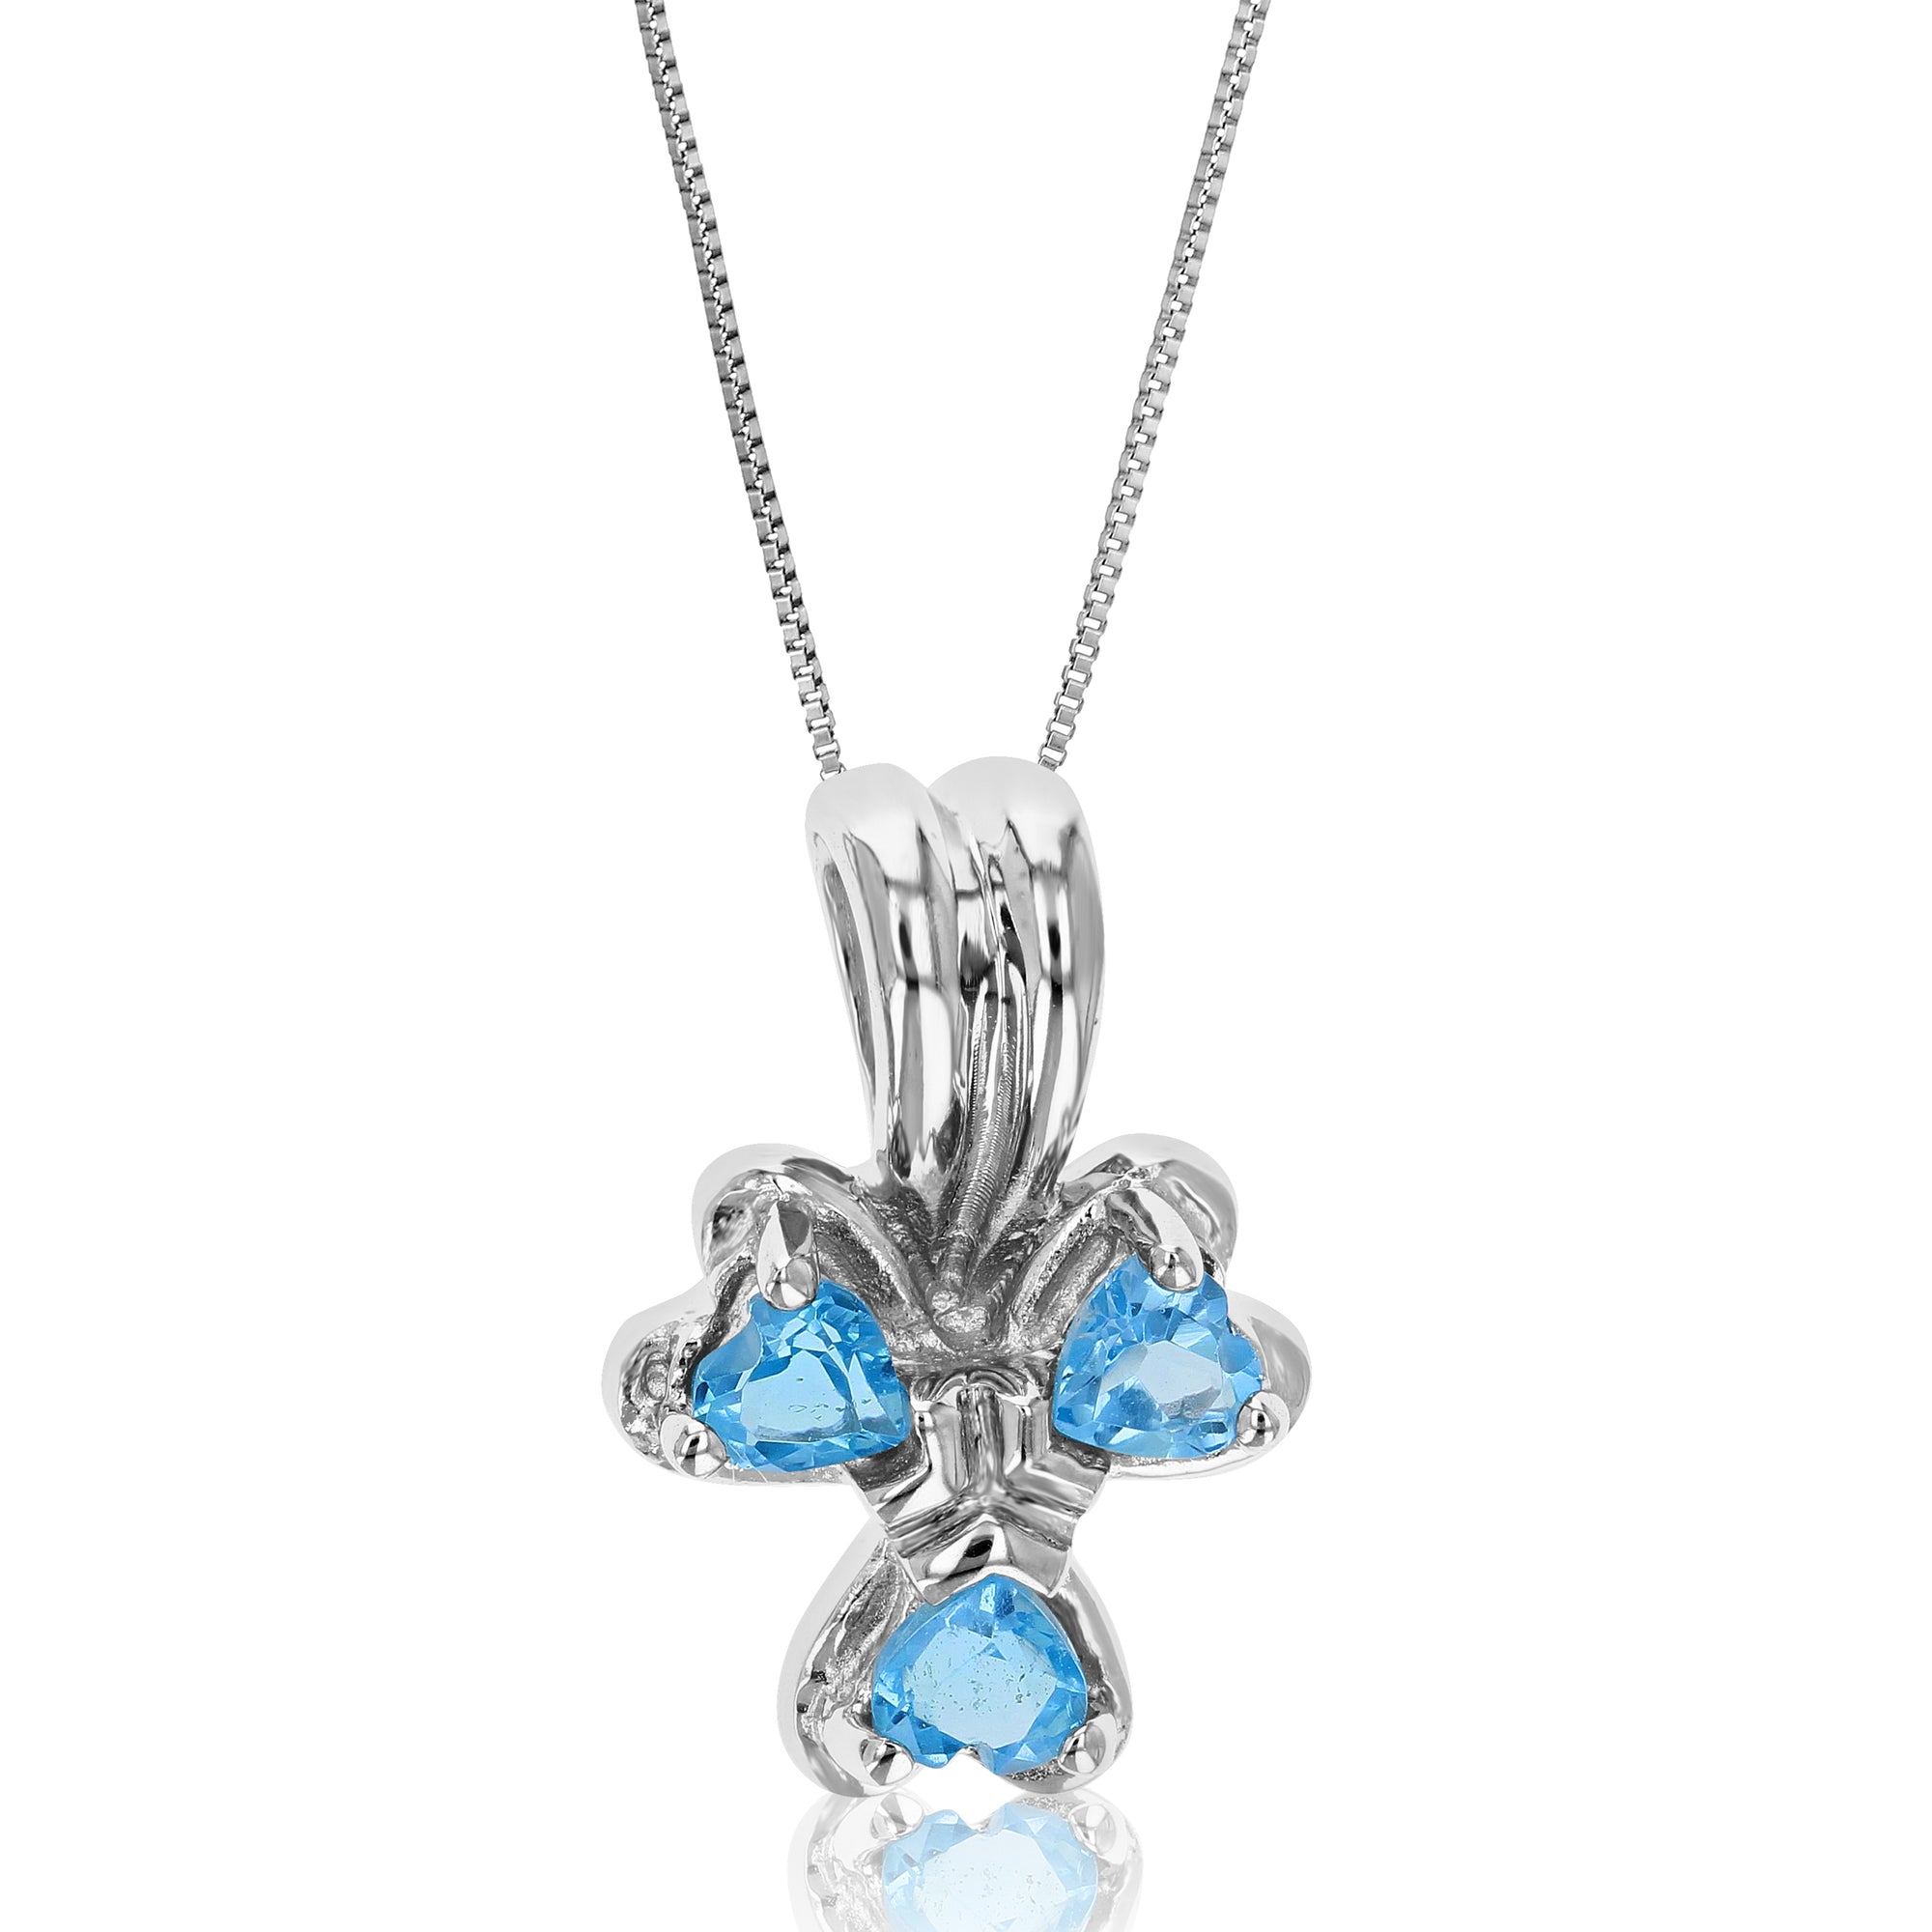 0.30 cttw Pendant Necklace, Swiss Blue Topaz Pendant Necklace for Women in .925 Sterling Silver with Rhodium, 18 Inch Chain, Prong Setting